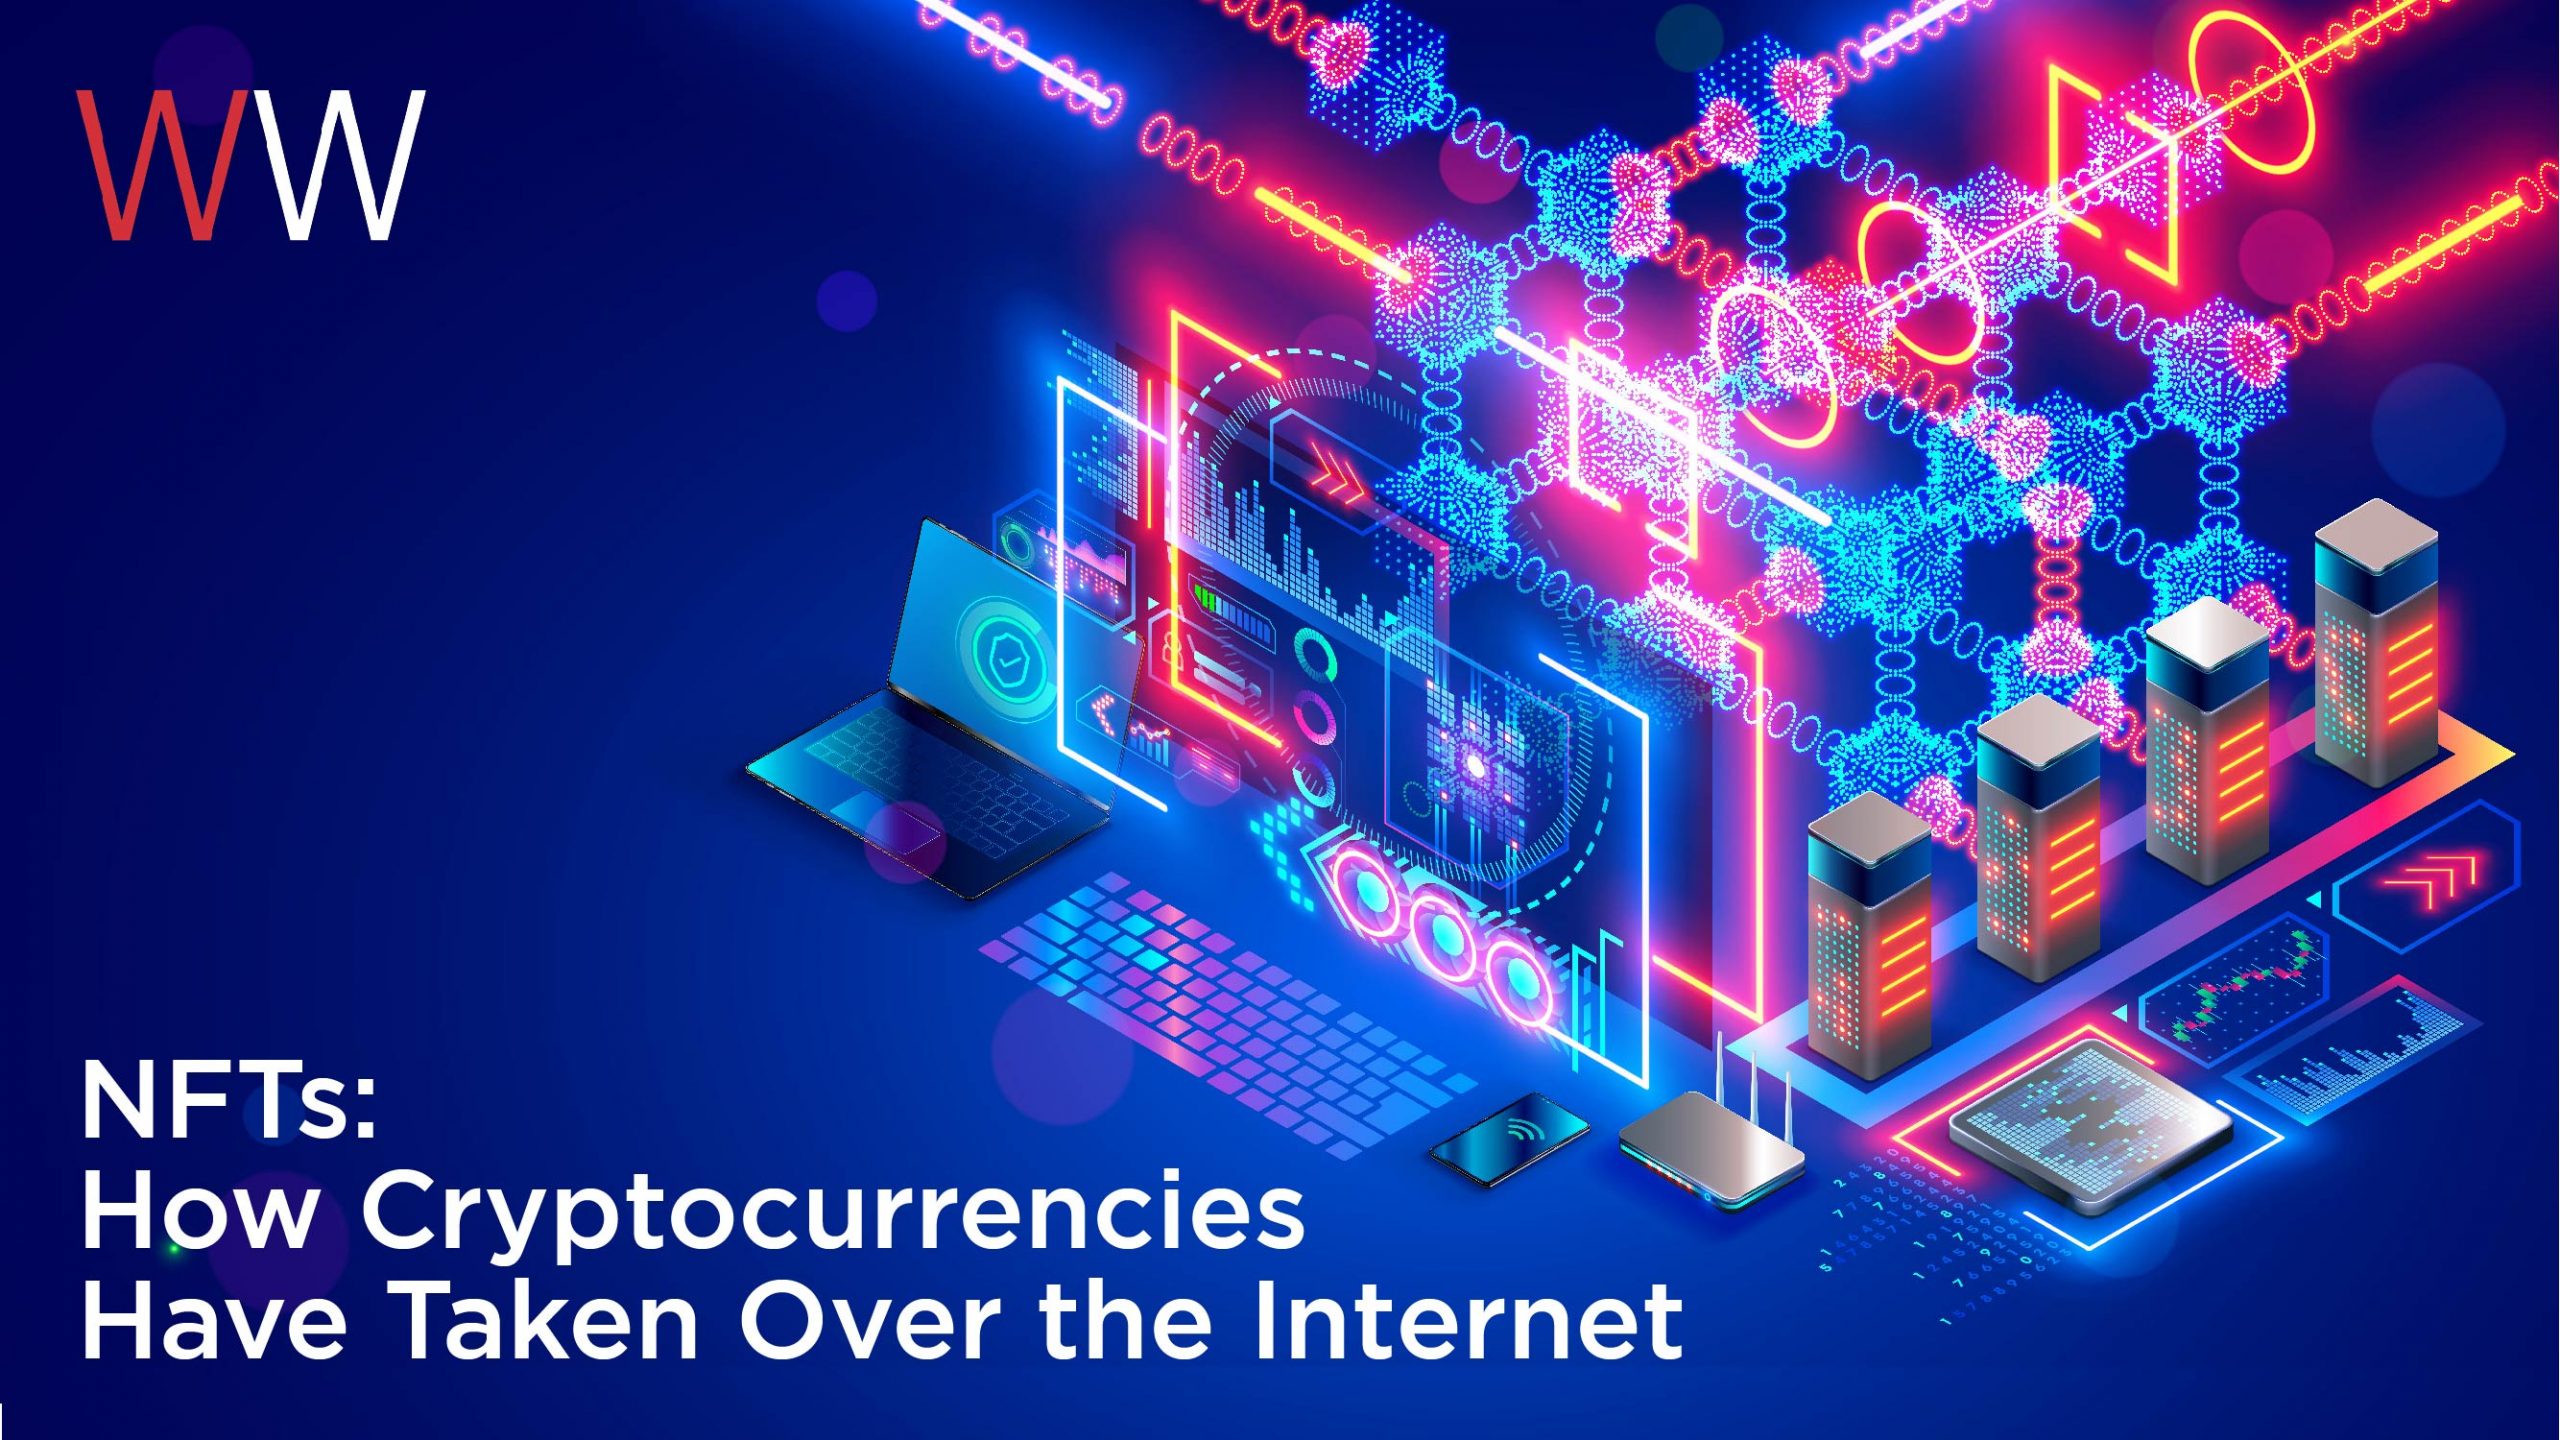 NFTs: How Cryptocurrencies Have Taken Over the Internet